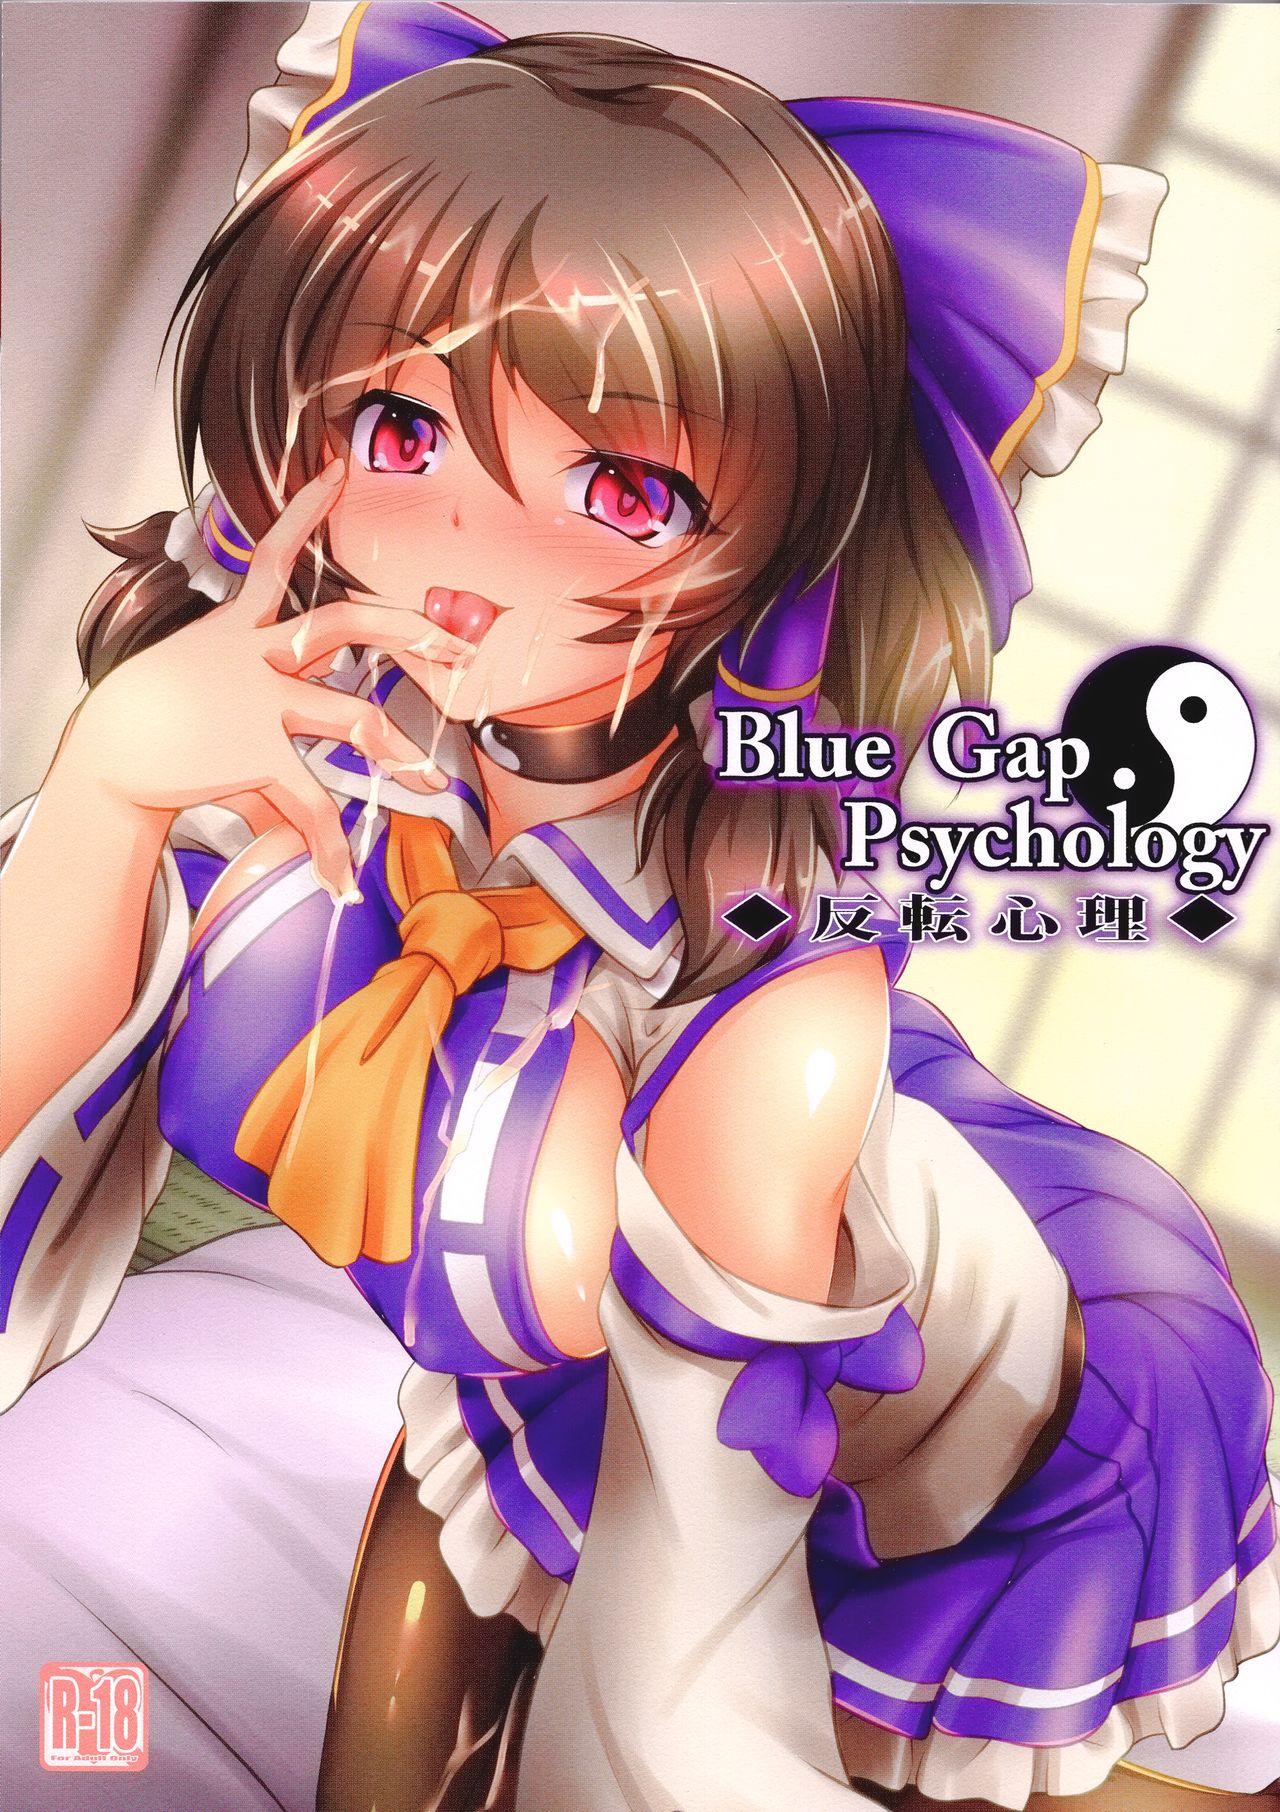 Whores Blue Gap Psychology - Touhou project Culonas - Page 2